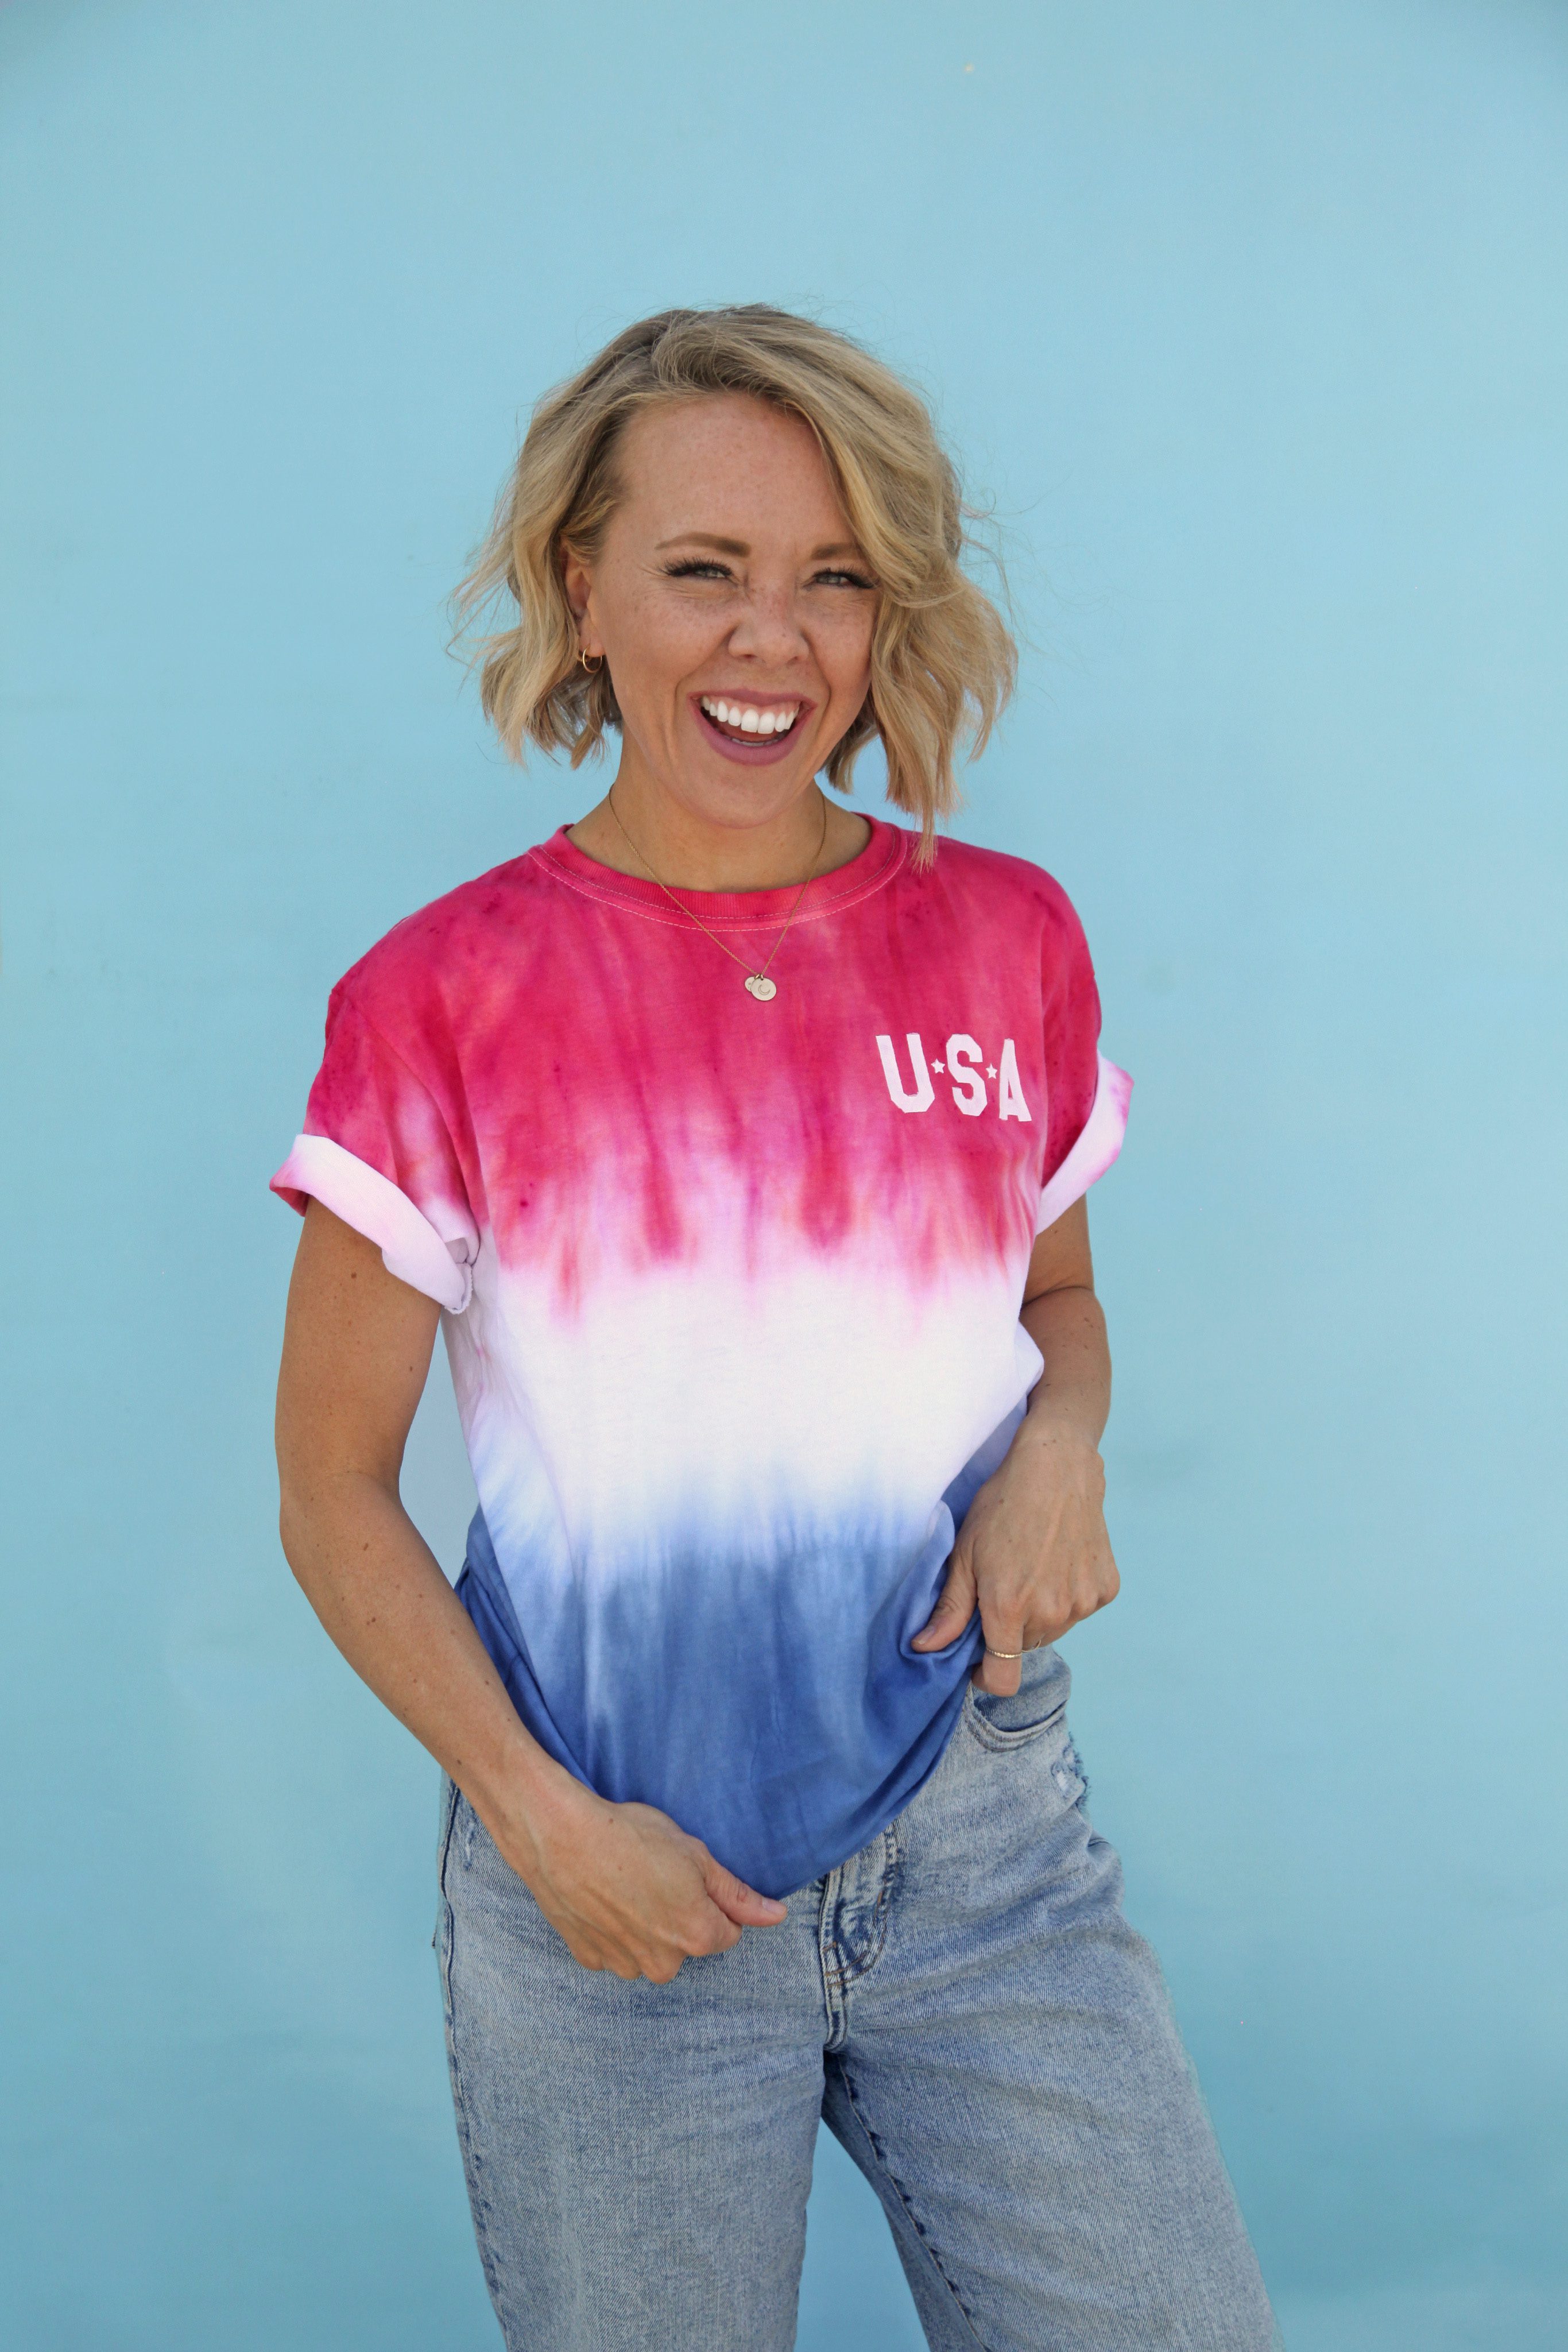 How to Firecracker Tie Dye a T-Shirt + a tutorial featured by Top US Craft Blog + The Pretty Life Girls